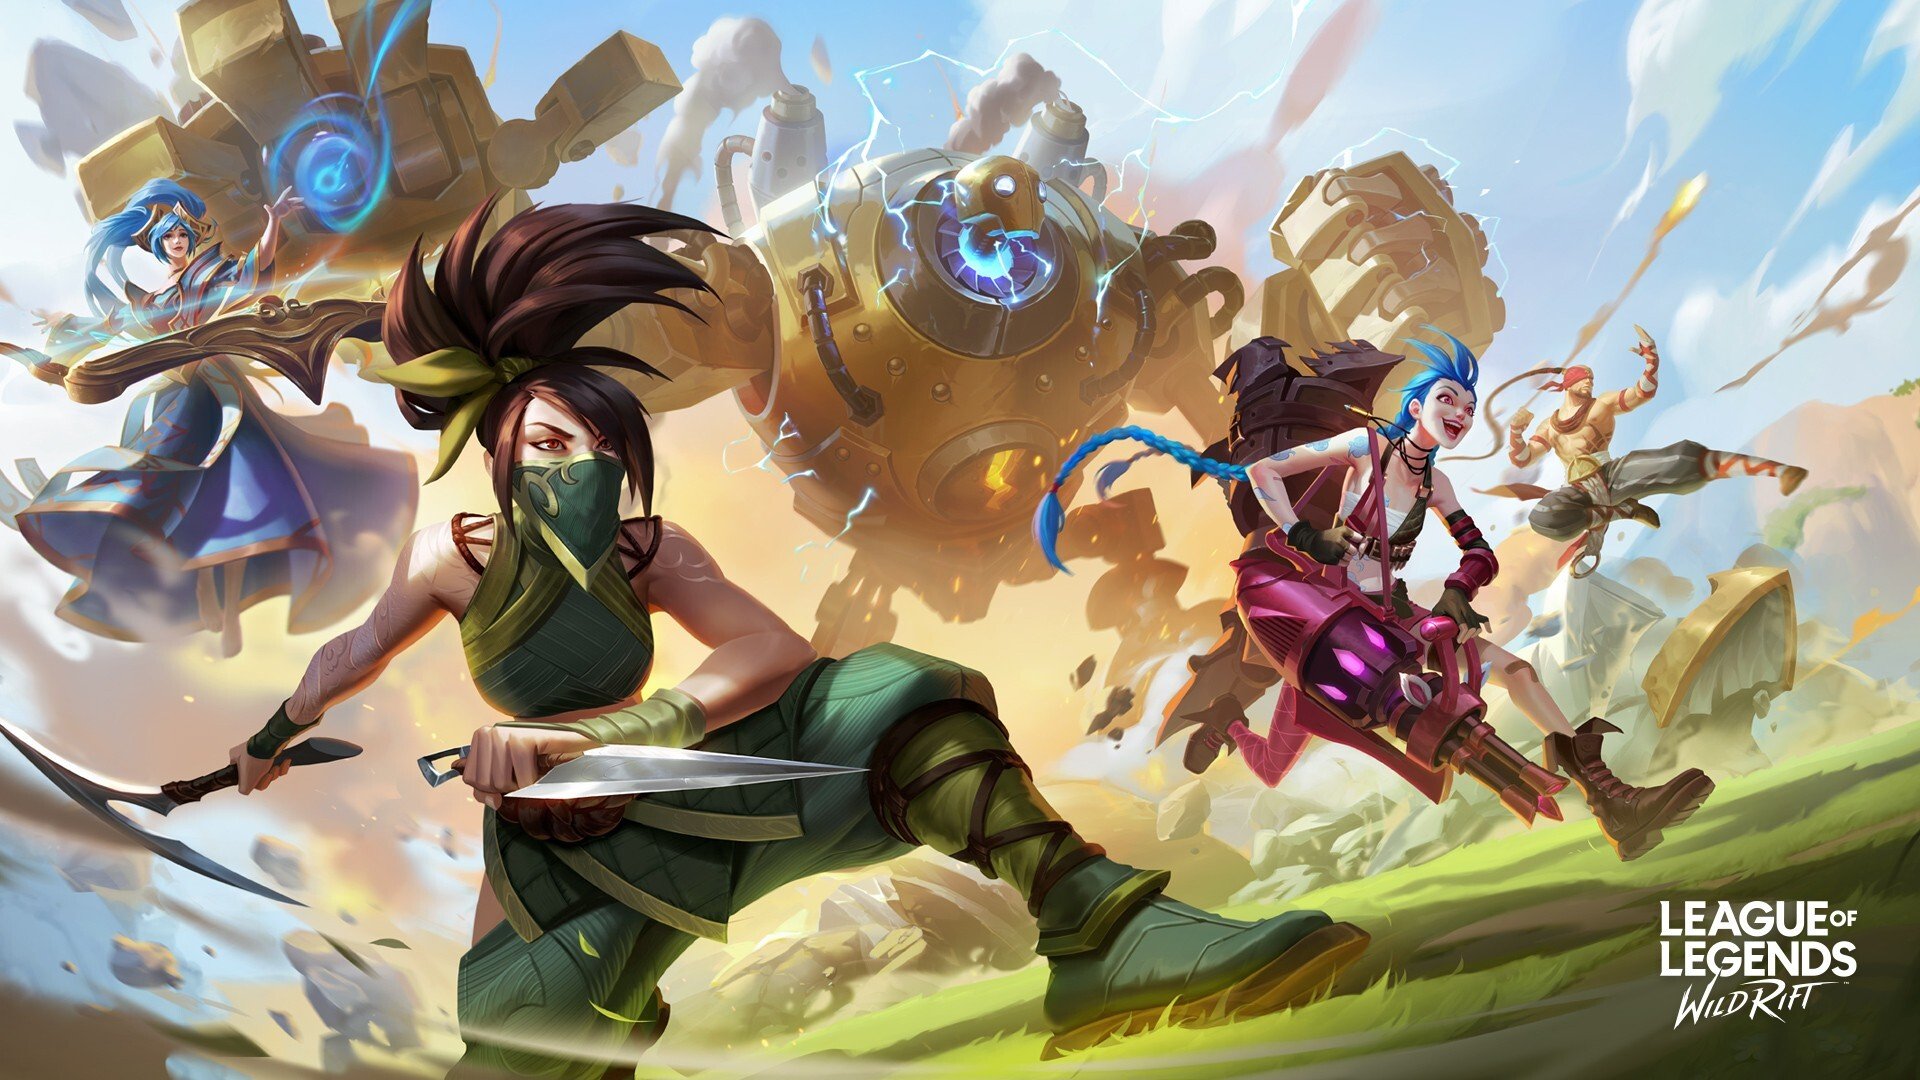 Tencent has launched League of Legends: Wild Rift in China, nearly a year after it launched as a public beta in other Asian countries, but it comes as the country’s video game industry is under increased pressure from regulators to curb gaming addiction among minors. Photo: Riot Games